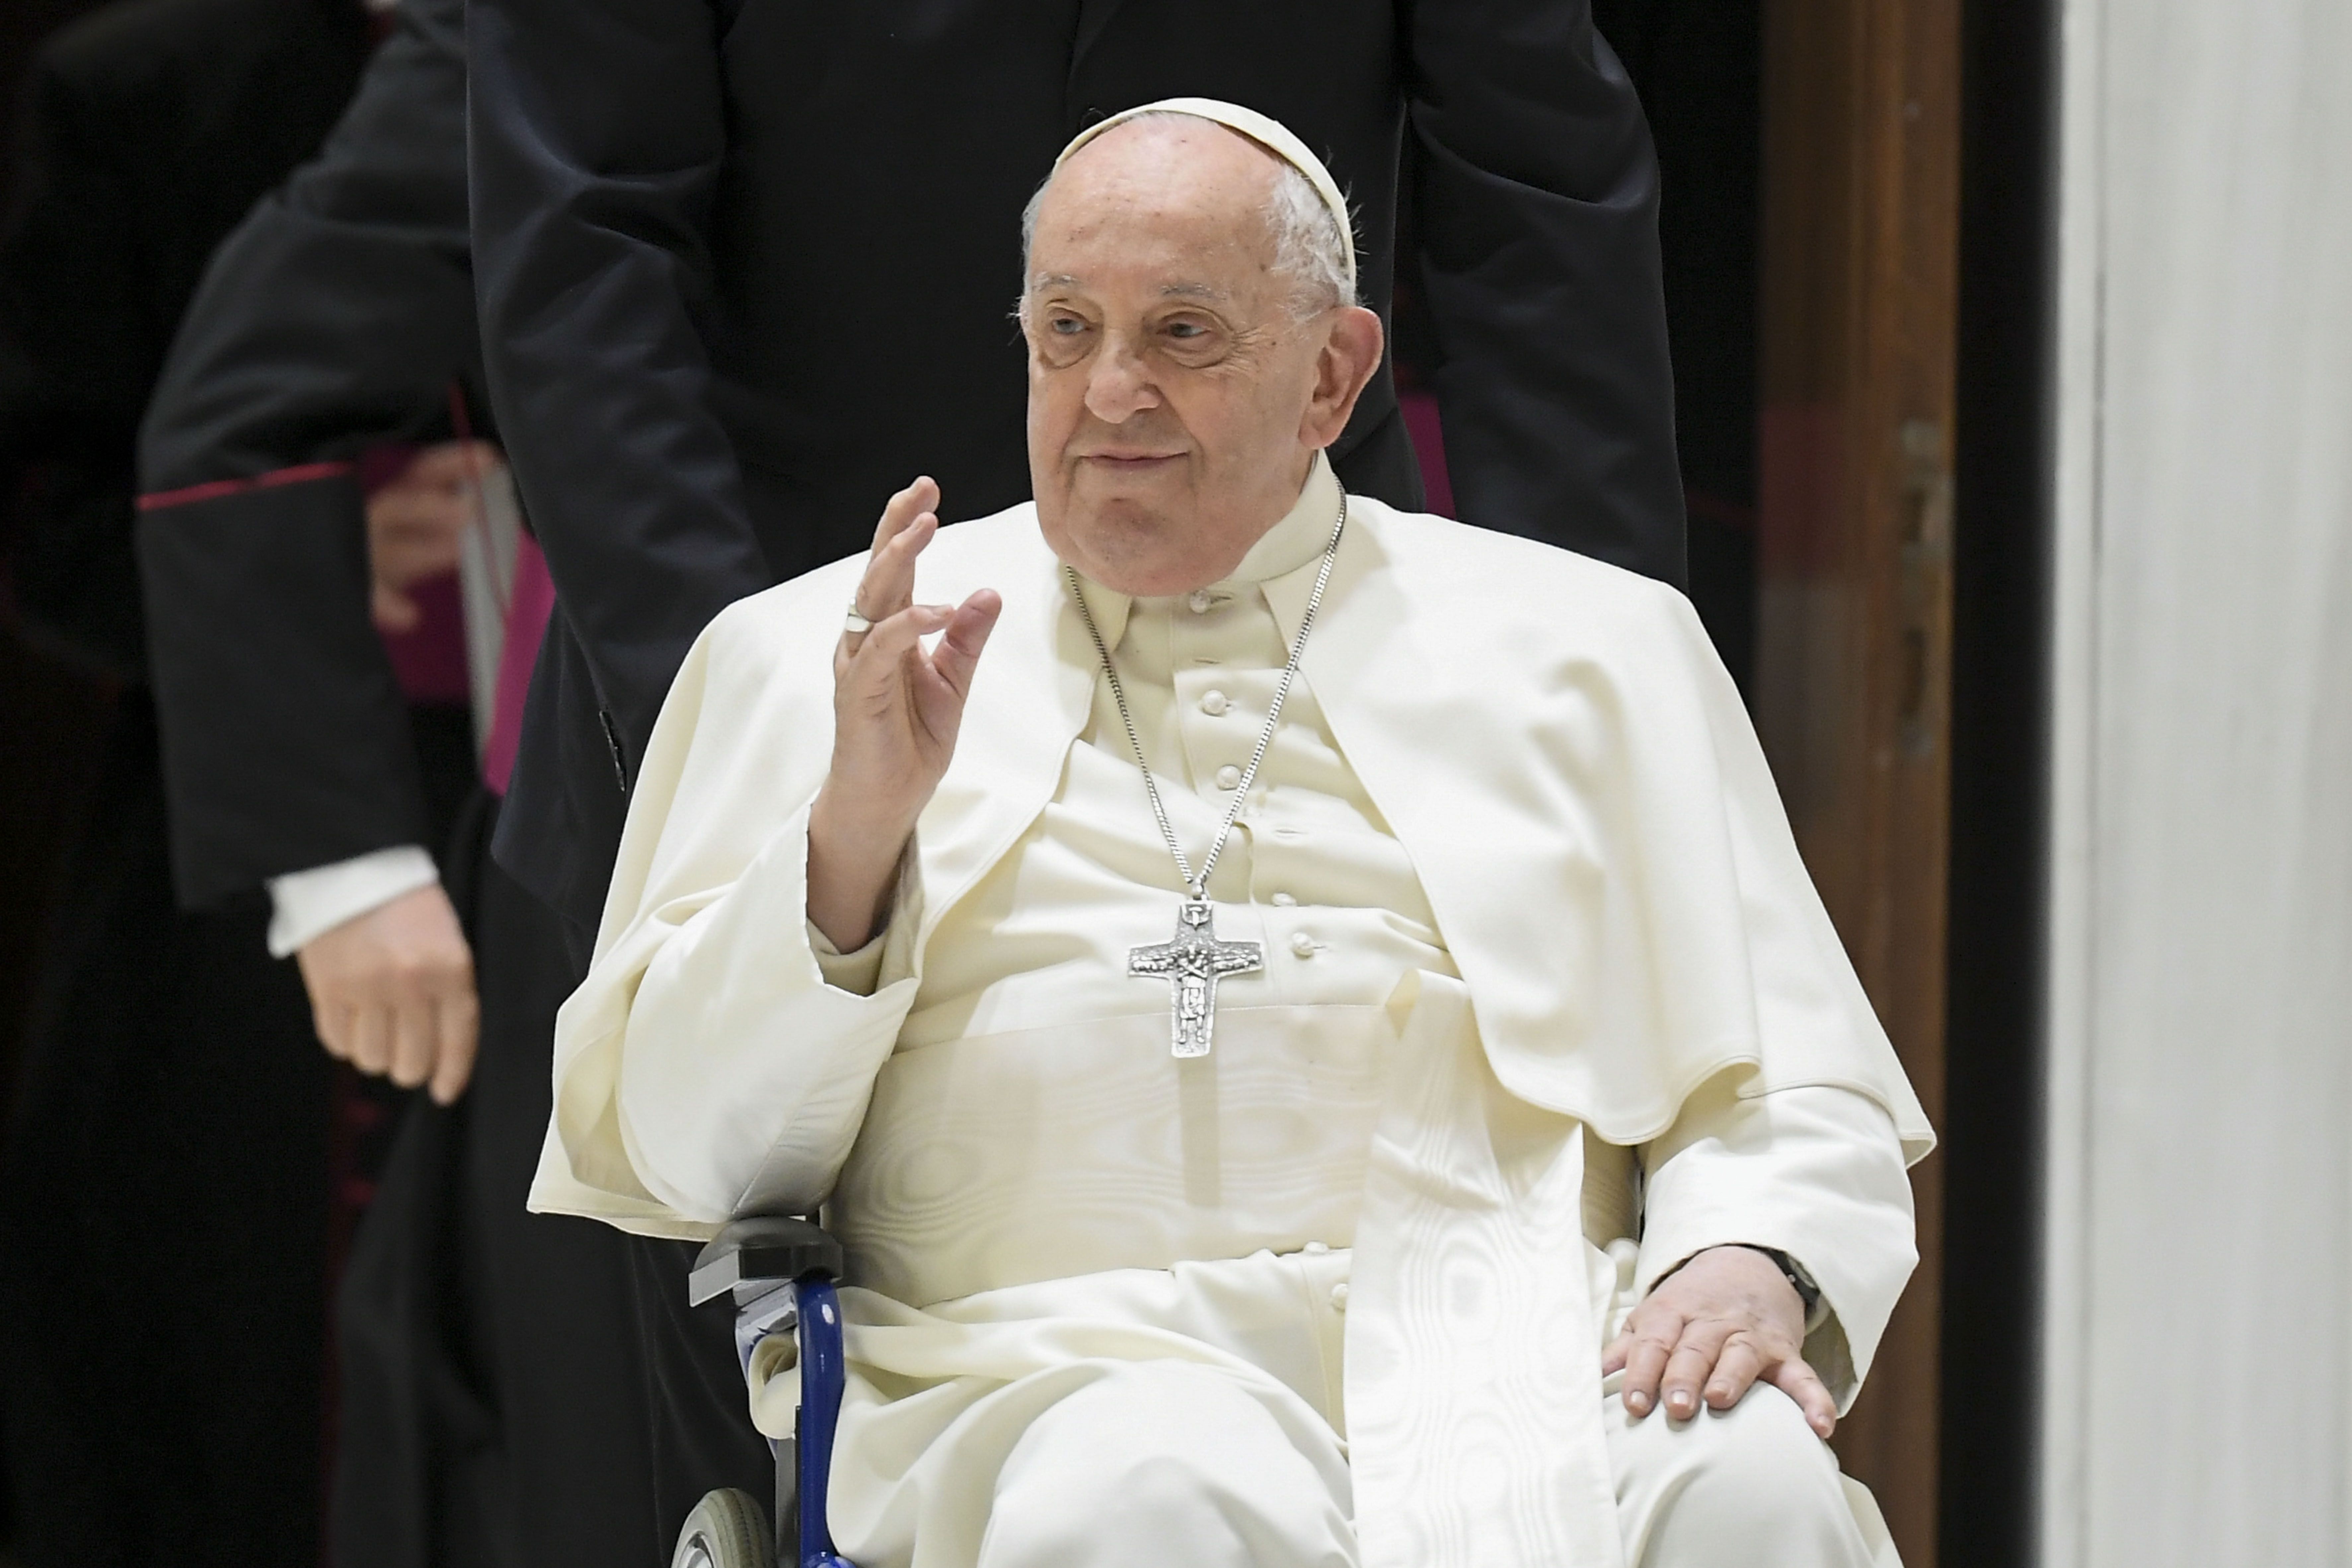 Pope Francis visits hospital for diagnostic tests after Wednesday audience